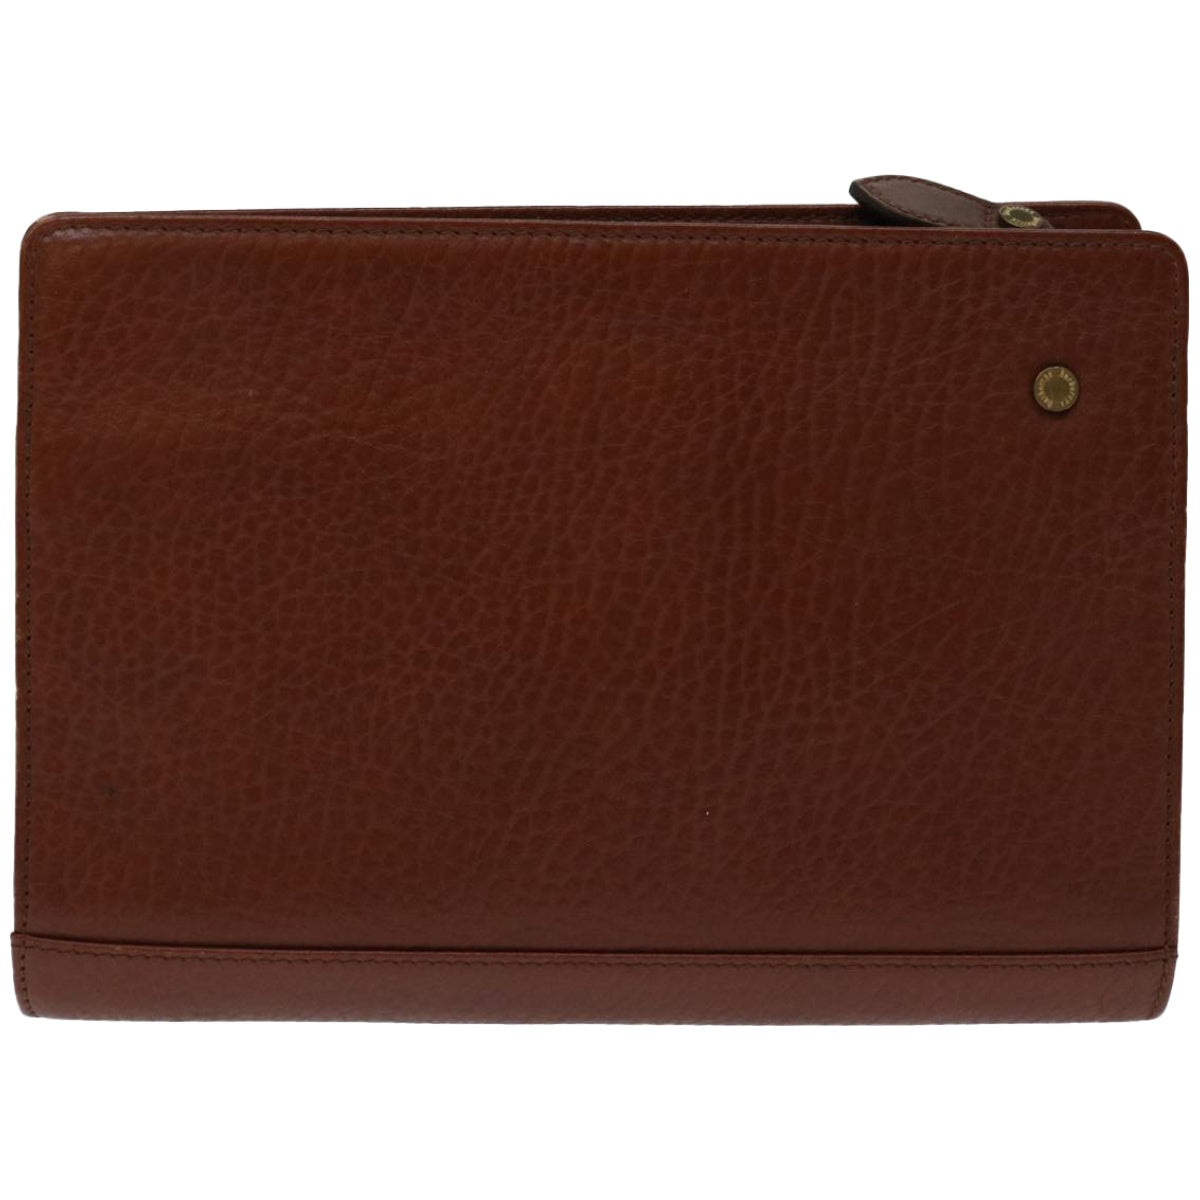 Burberrys Clutch Bag Leather Brown Auth bs12180 - 0